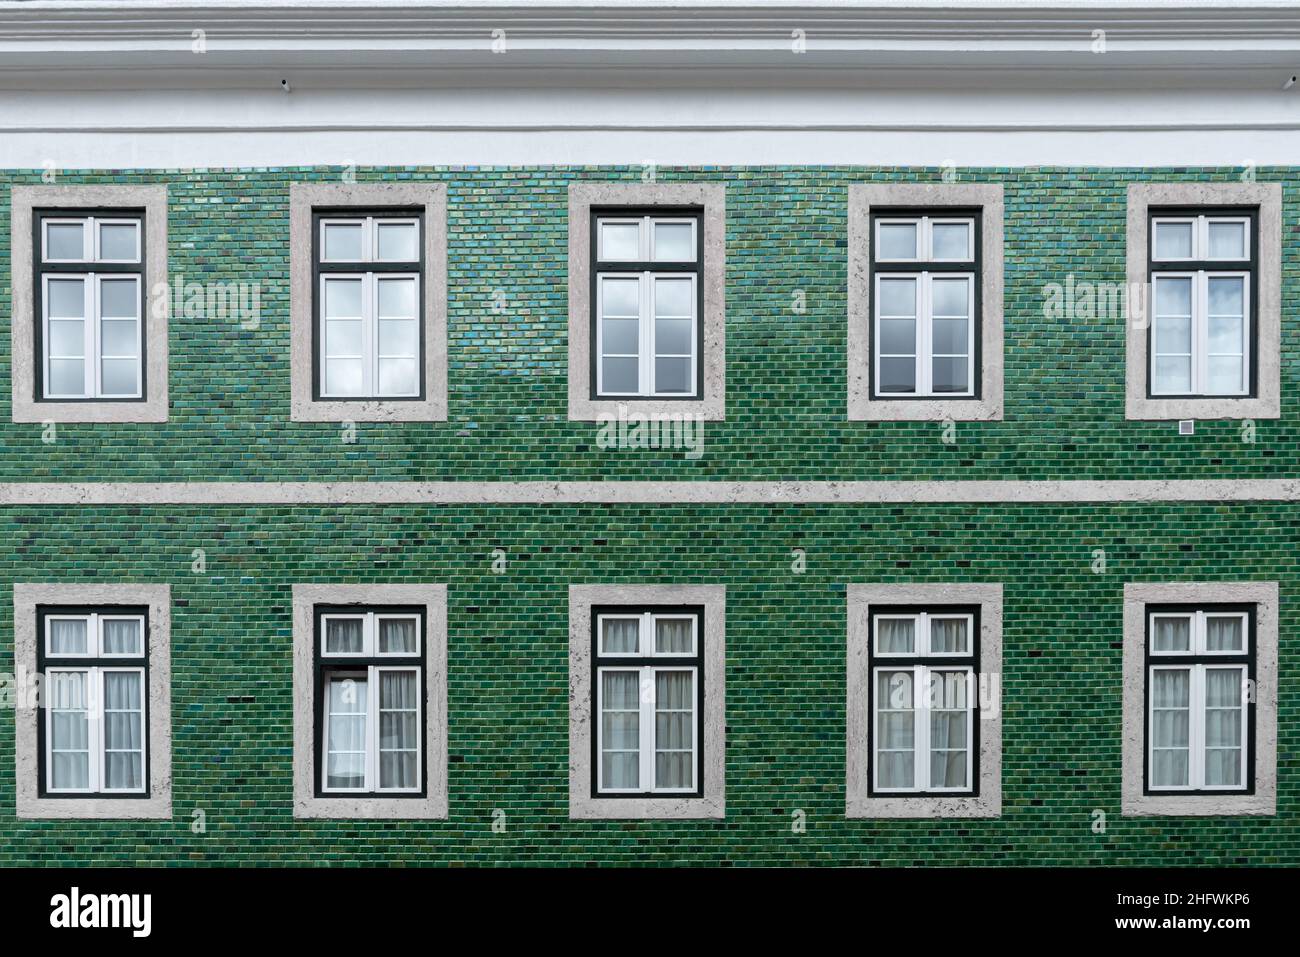 Architectural detail close-up of traditional green tile wall facade of apartment building in Lisbon Portugal Stock Photo